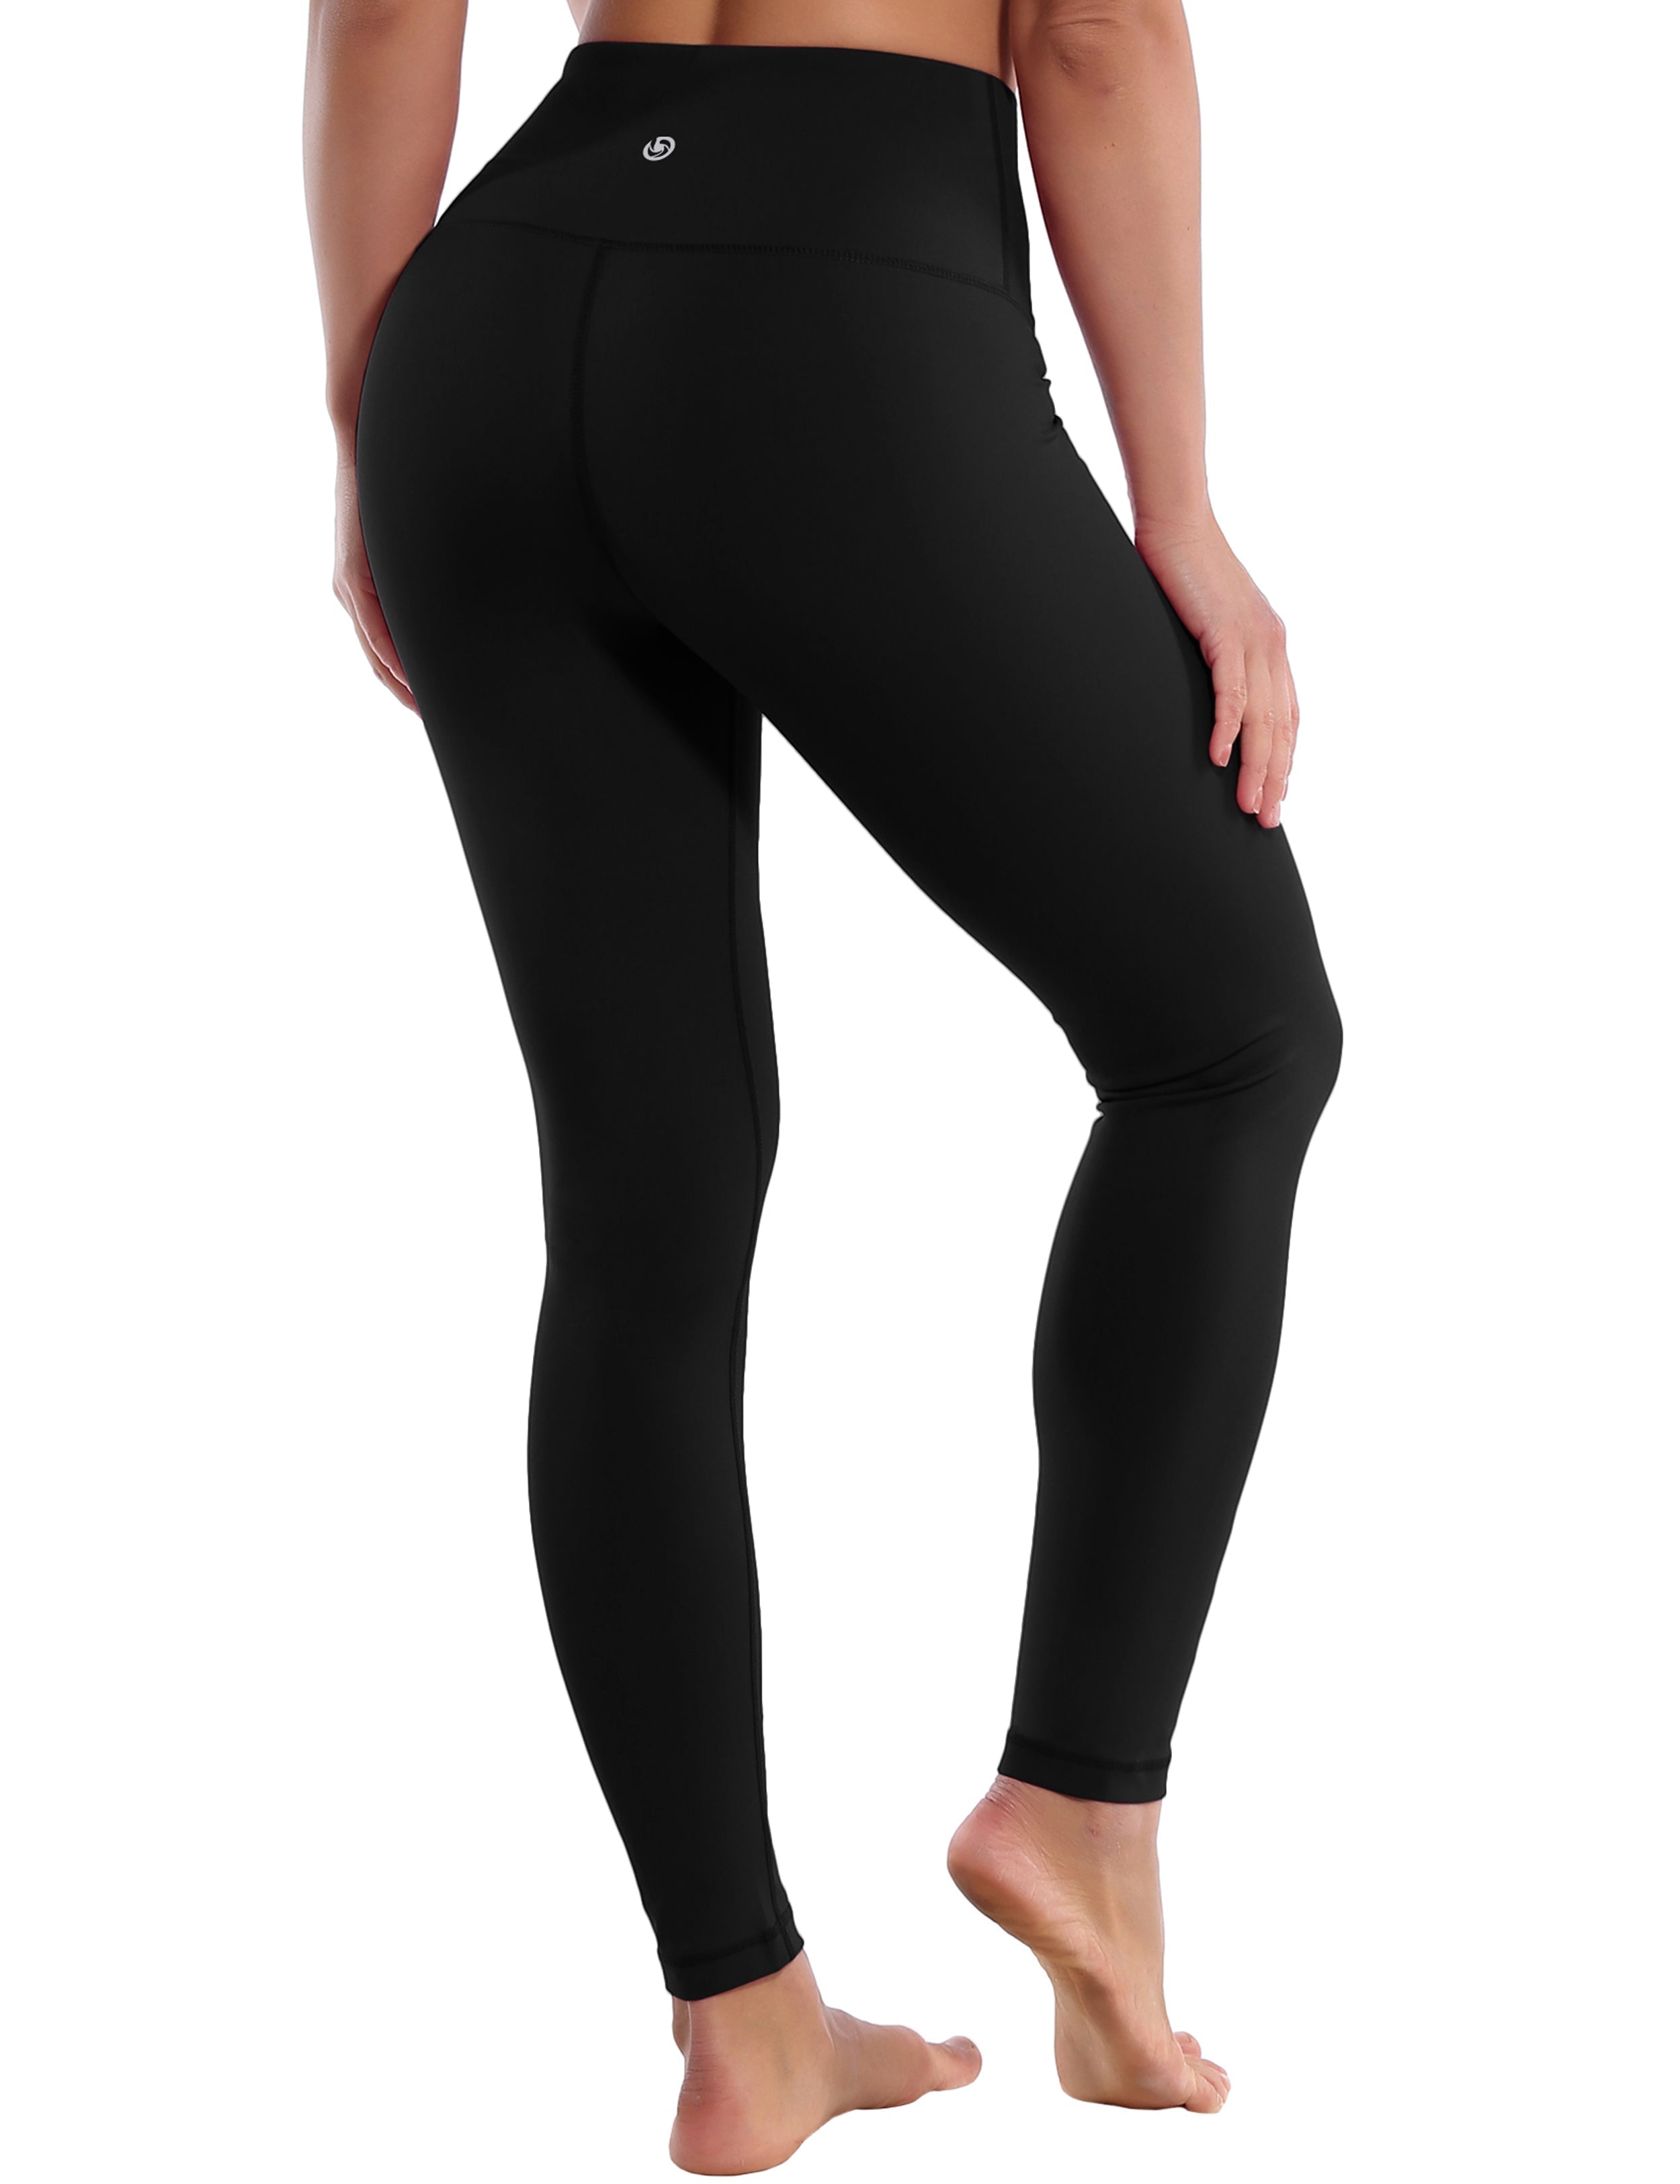 High Waist yogastudio Pants black 75%Nylon/25%Spandex Fabric doesn't attract lint easily 4-way stretch No see-through Moisture-wicking Tummy control Inner pocket Four lengths